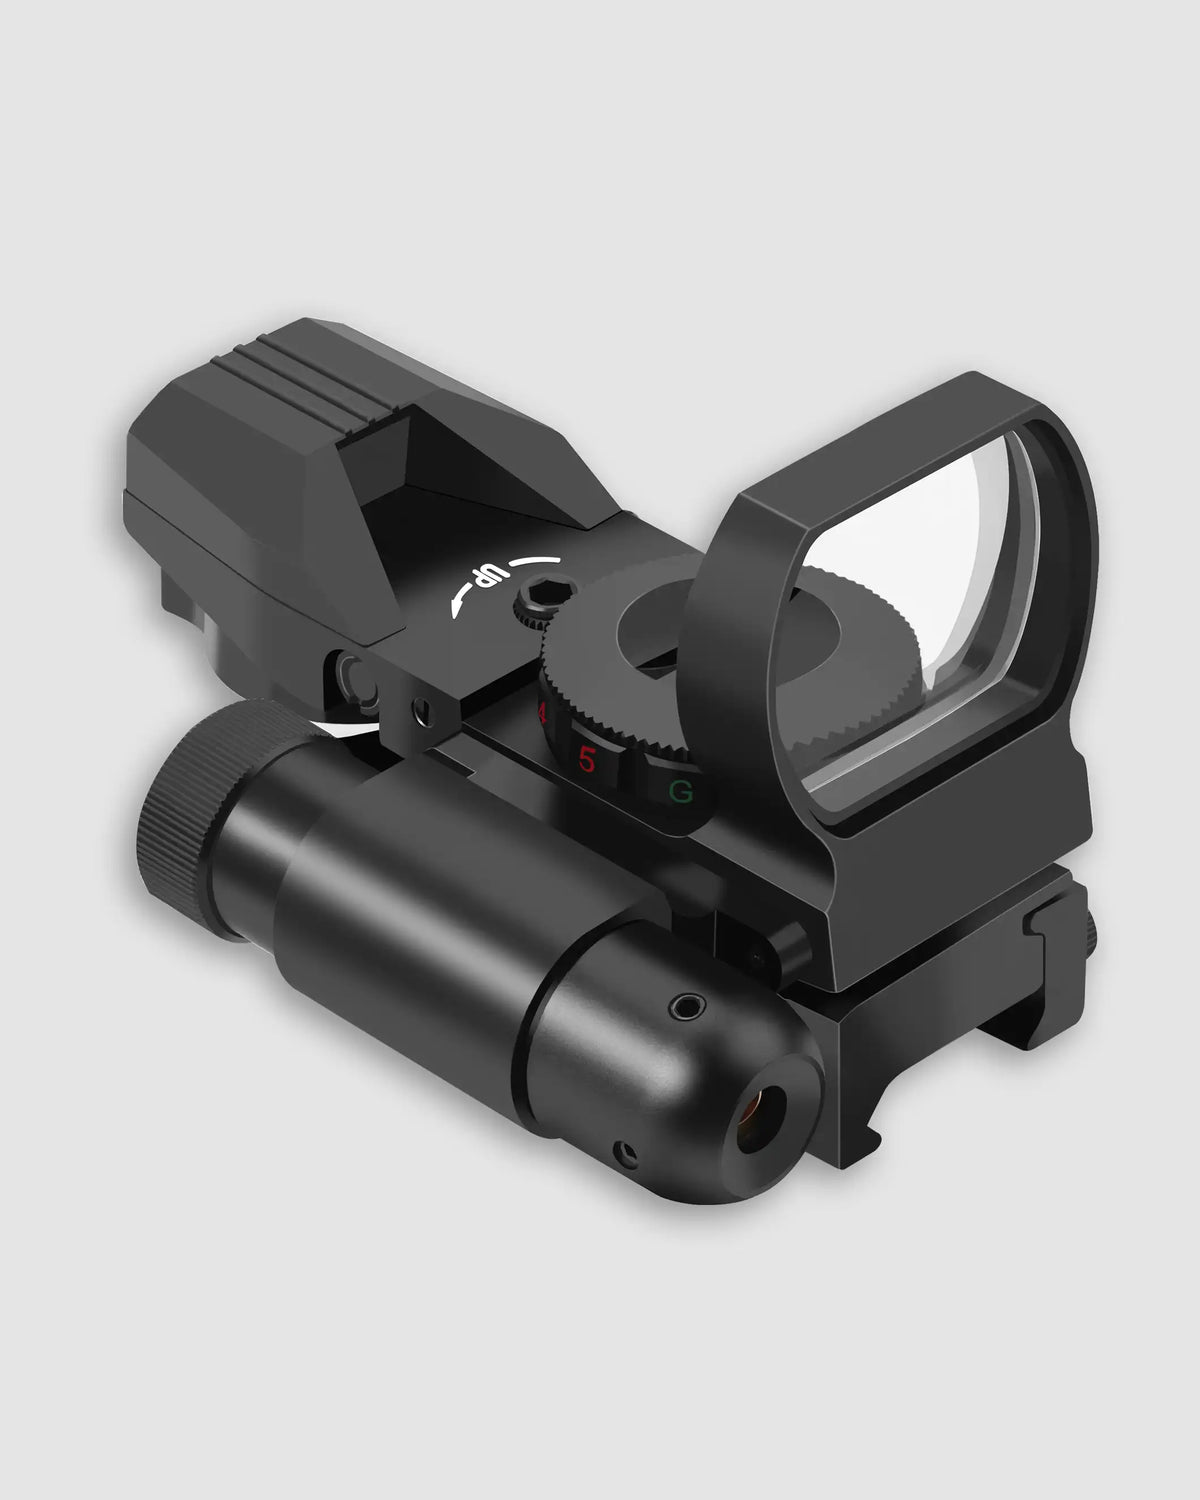 Feyachi RSL-18 Reflex Sight with Laser - 4 Reticle Integrated Laser